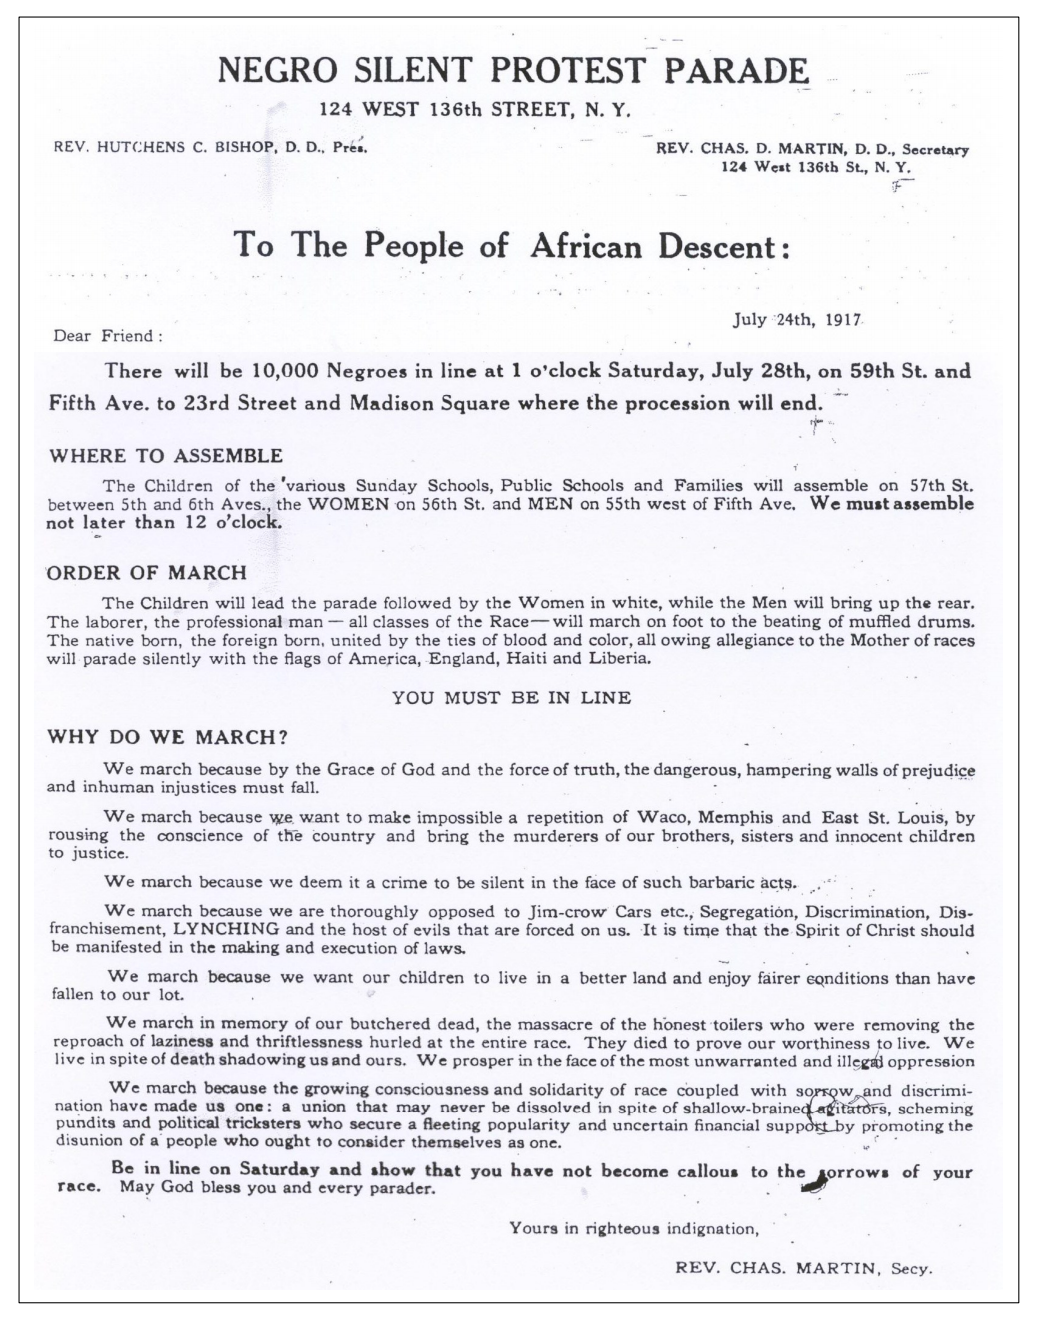 NAACP Silent Protest Parade, flyer, July 1917